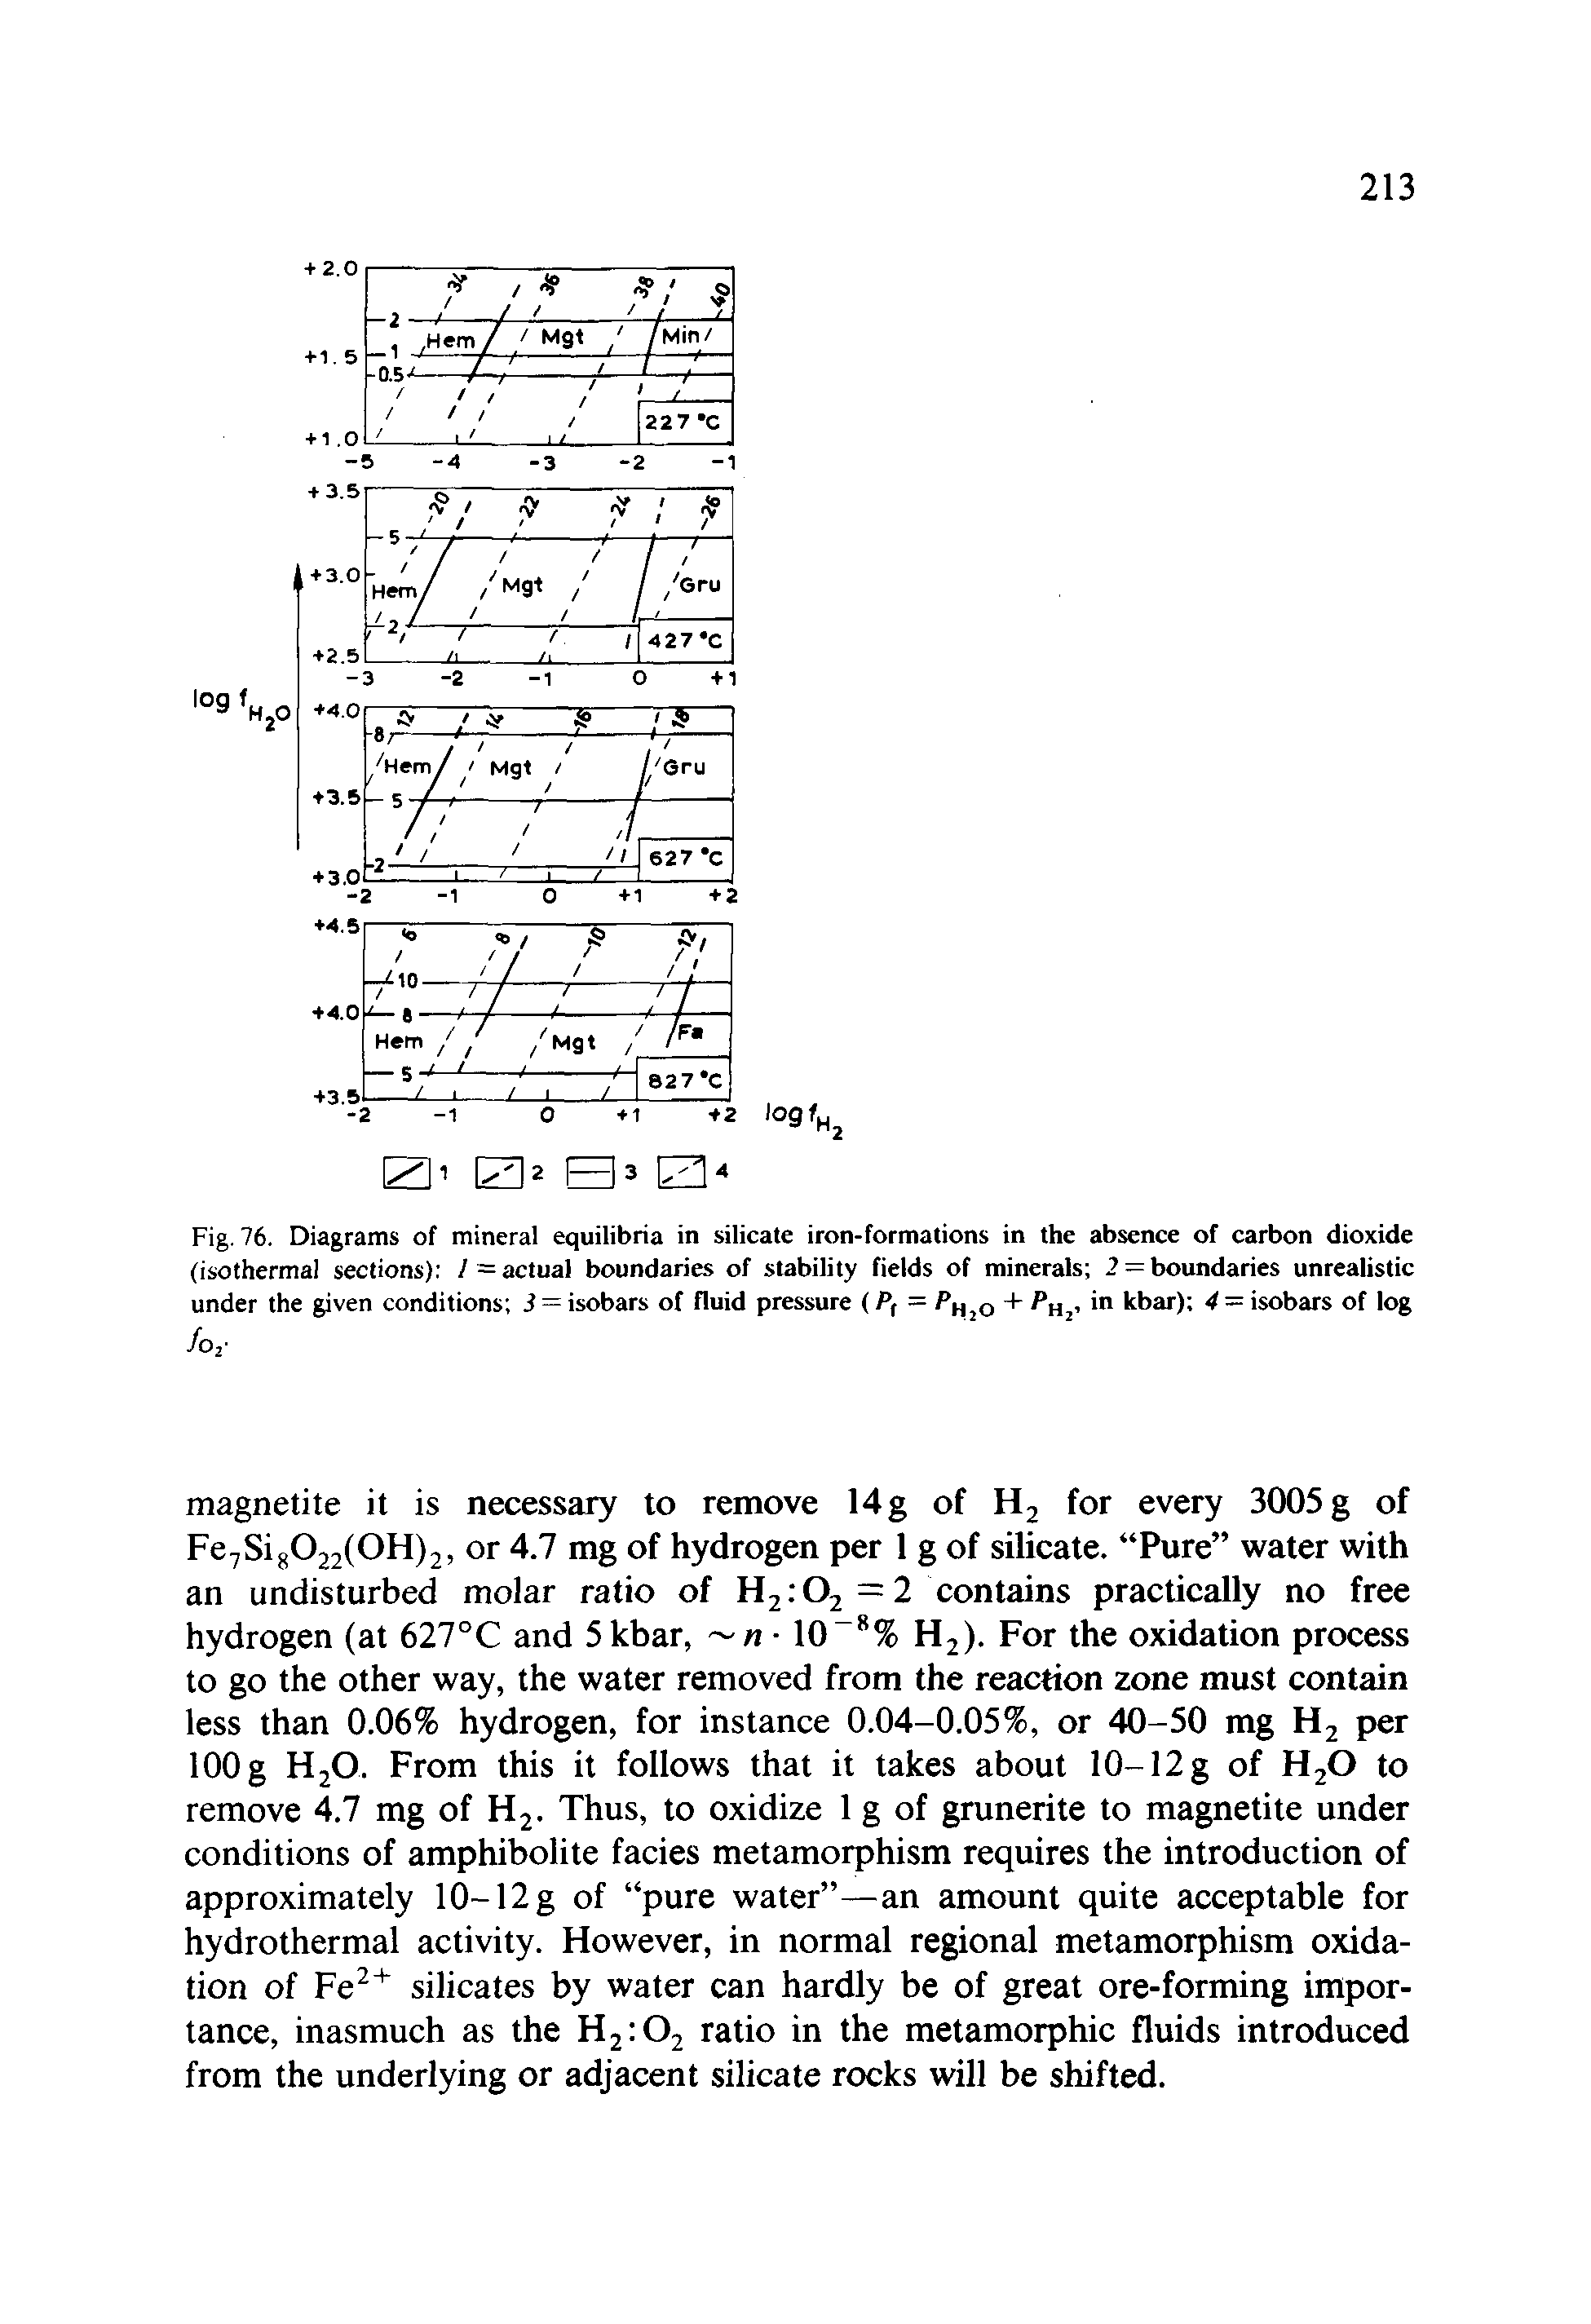 Fig. 76. Diagrams of mineral equilibria in silicate iron-formations in the absence of carbon dioxide (isothermal sections) / = actual boundaries of stability fields of minerals 2 = boundaries unrealistic under the given conditions S = isobars of fluid pressure (P, = jO + kbar) 4 = isobars of log...